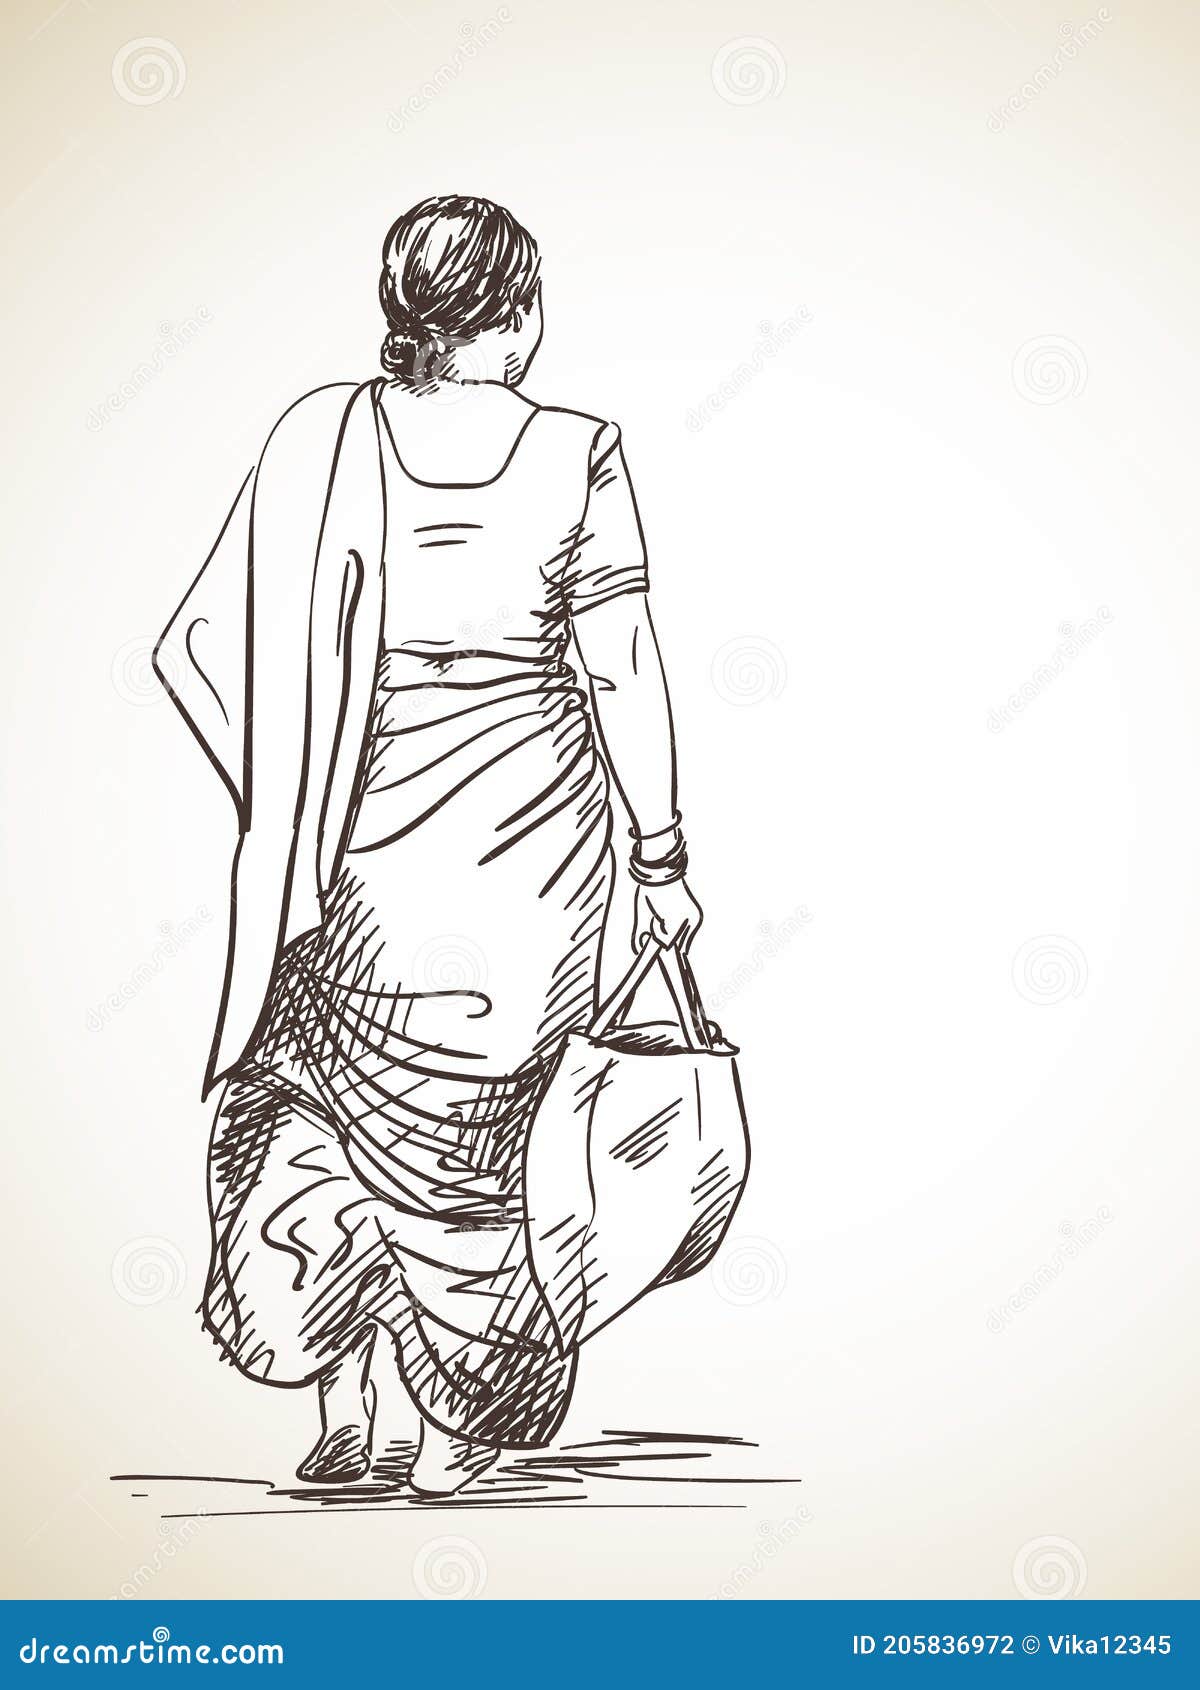 For the love of sarees, pencil sketch : r/sketches